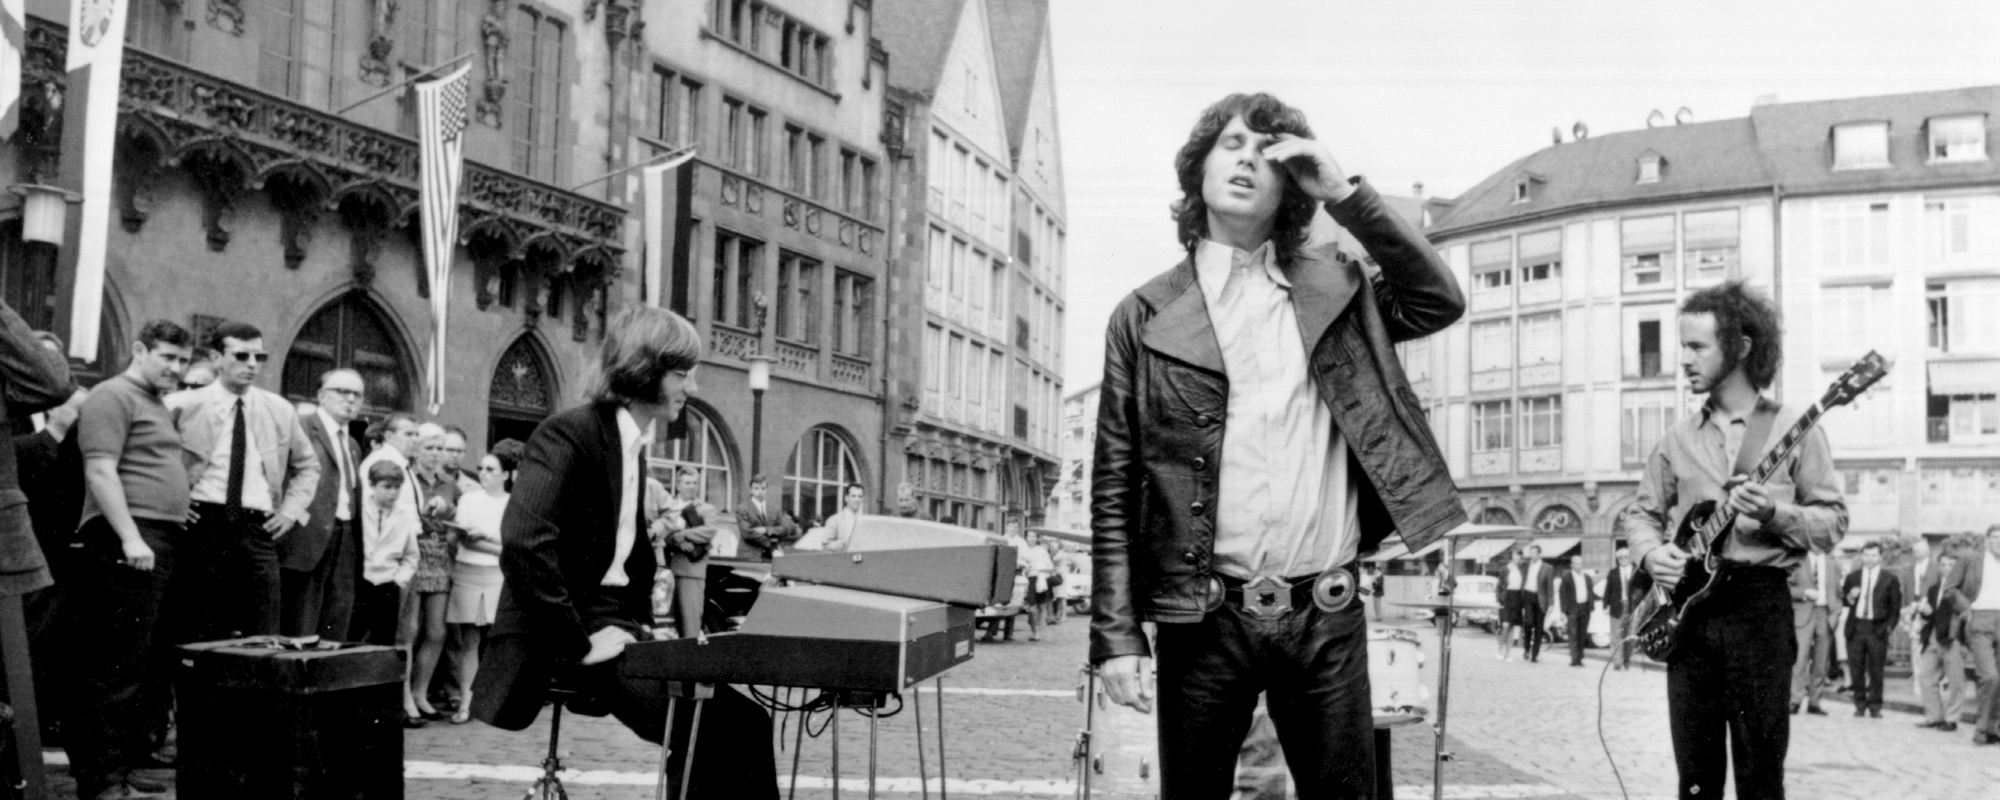 The Meaning Behind “Break on Through (To the Other Side)” by The Doors and Why It Became a Hit Long After It Debuted